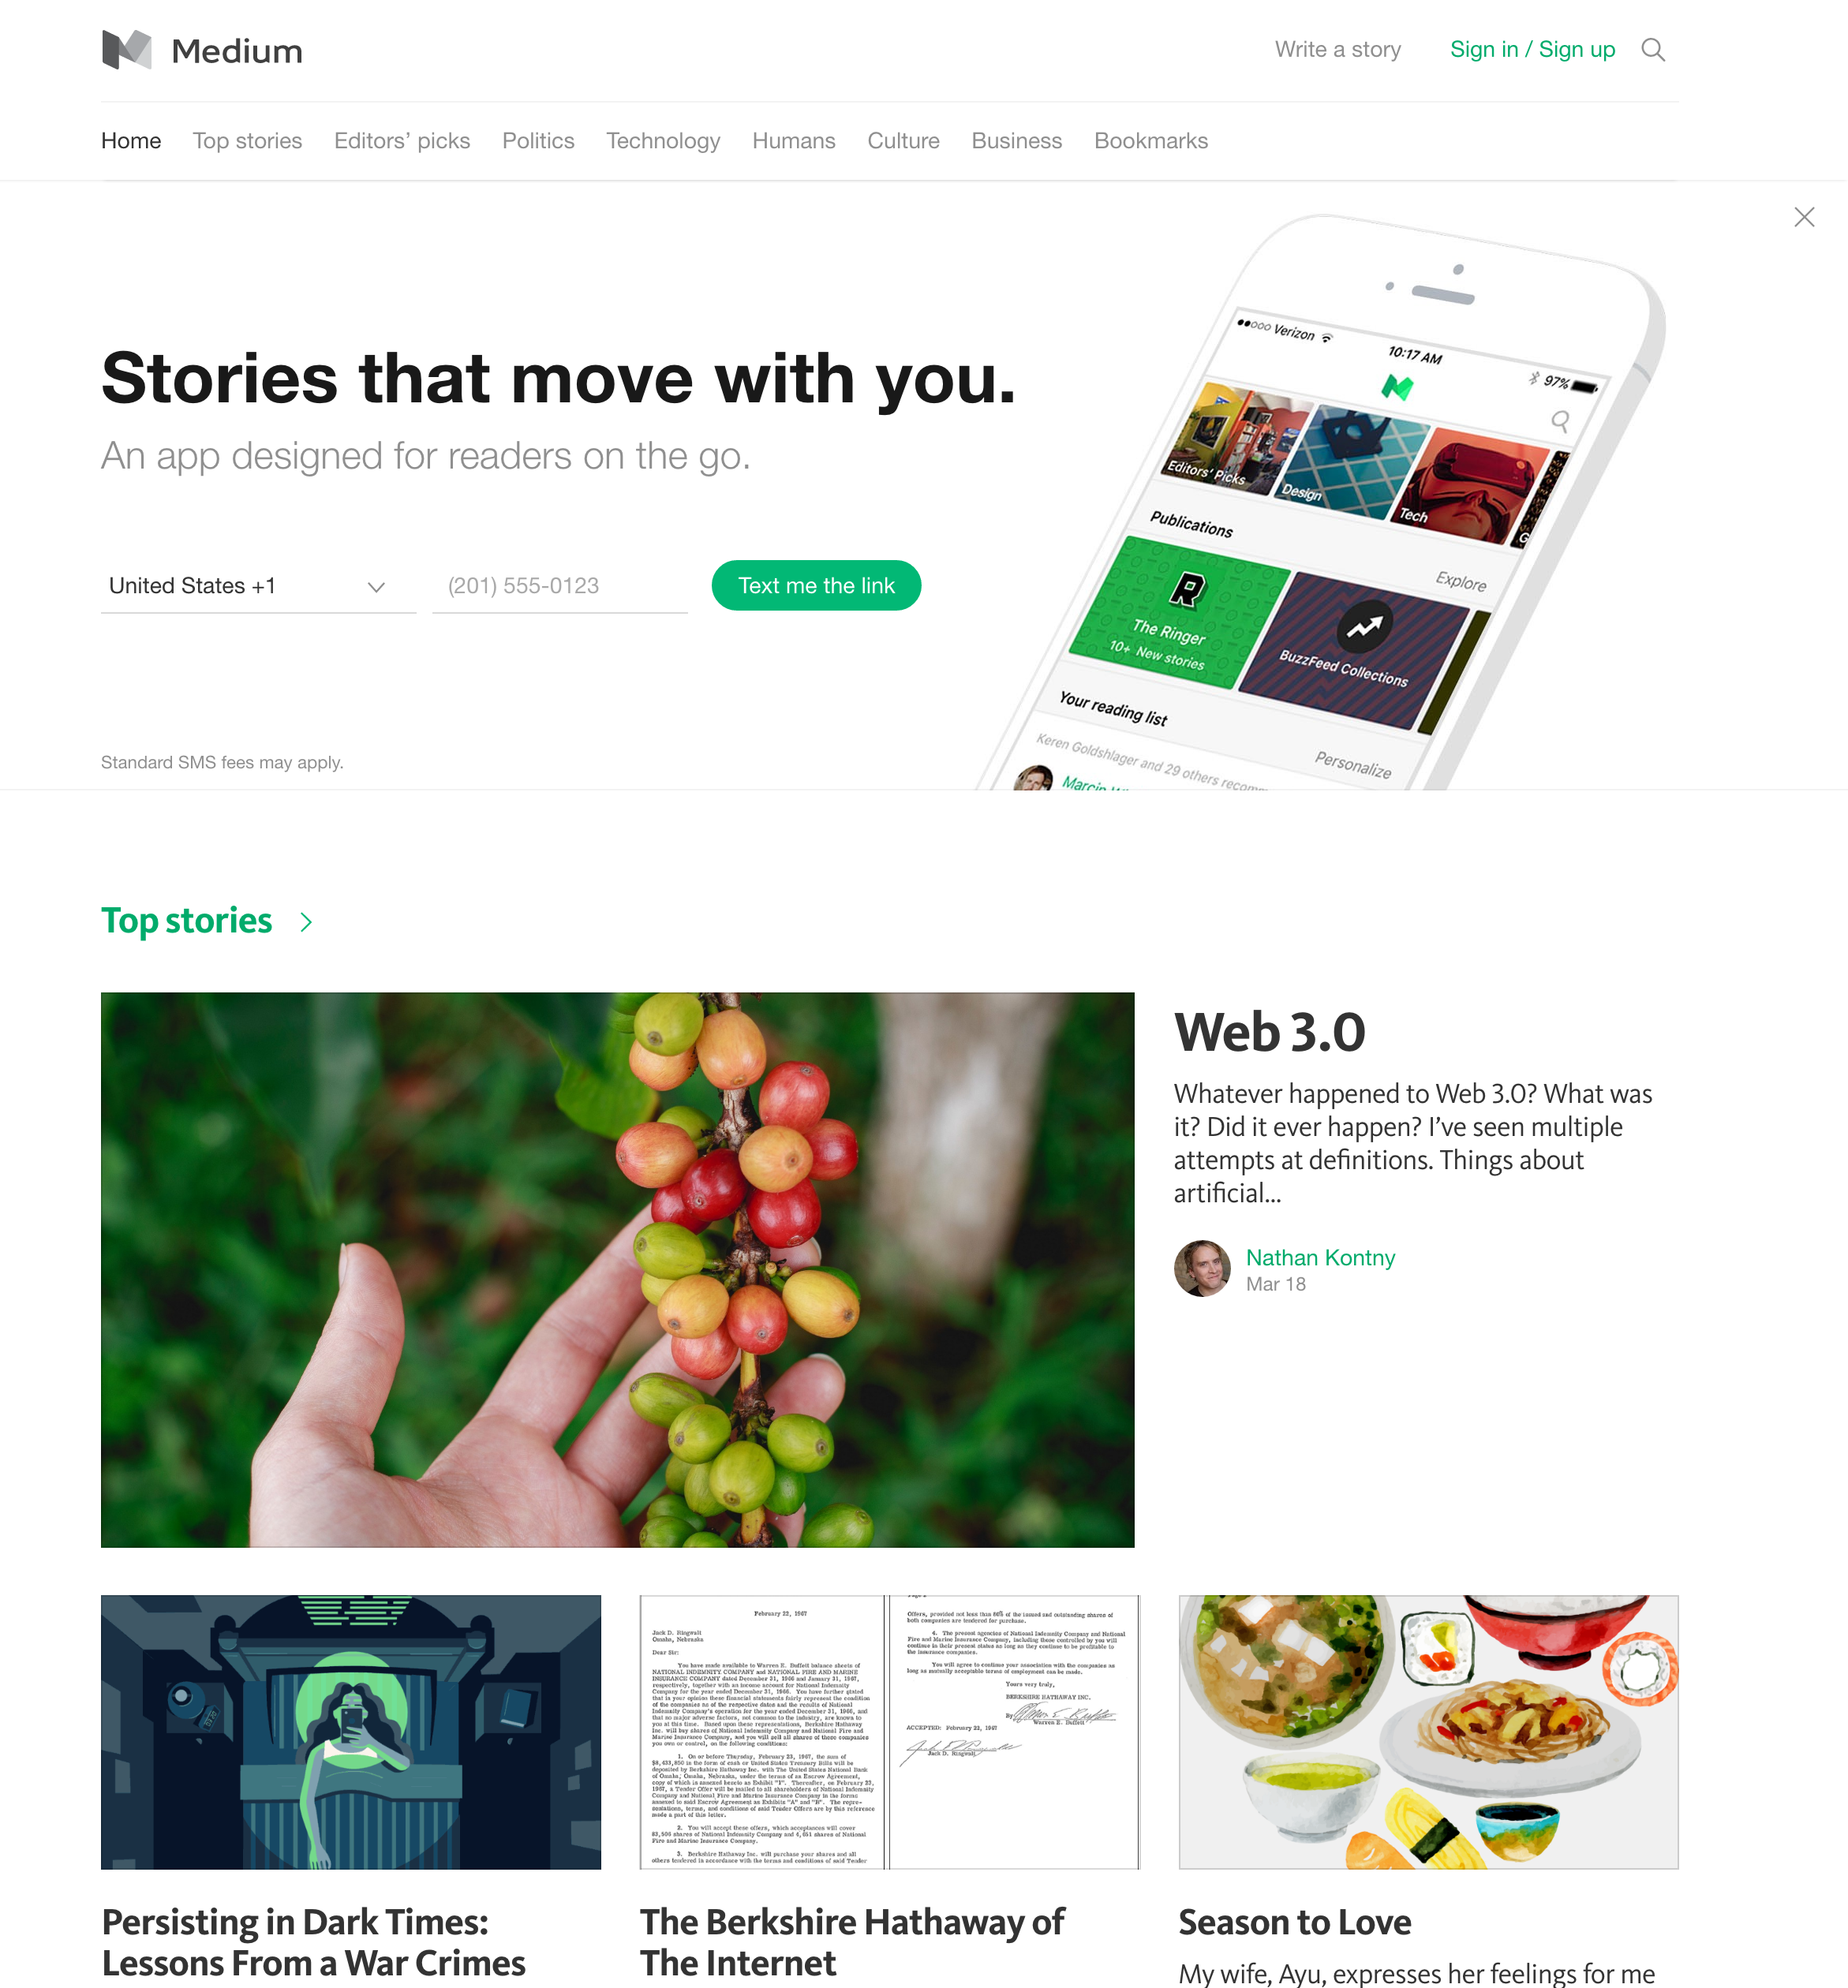 Medium is a great example of how flat design helps users to focus on the content.